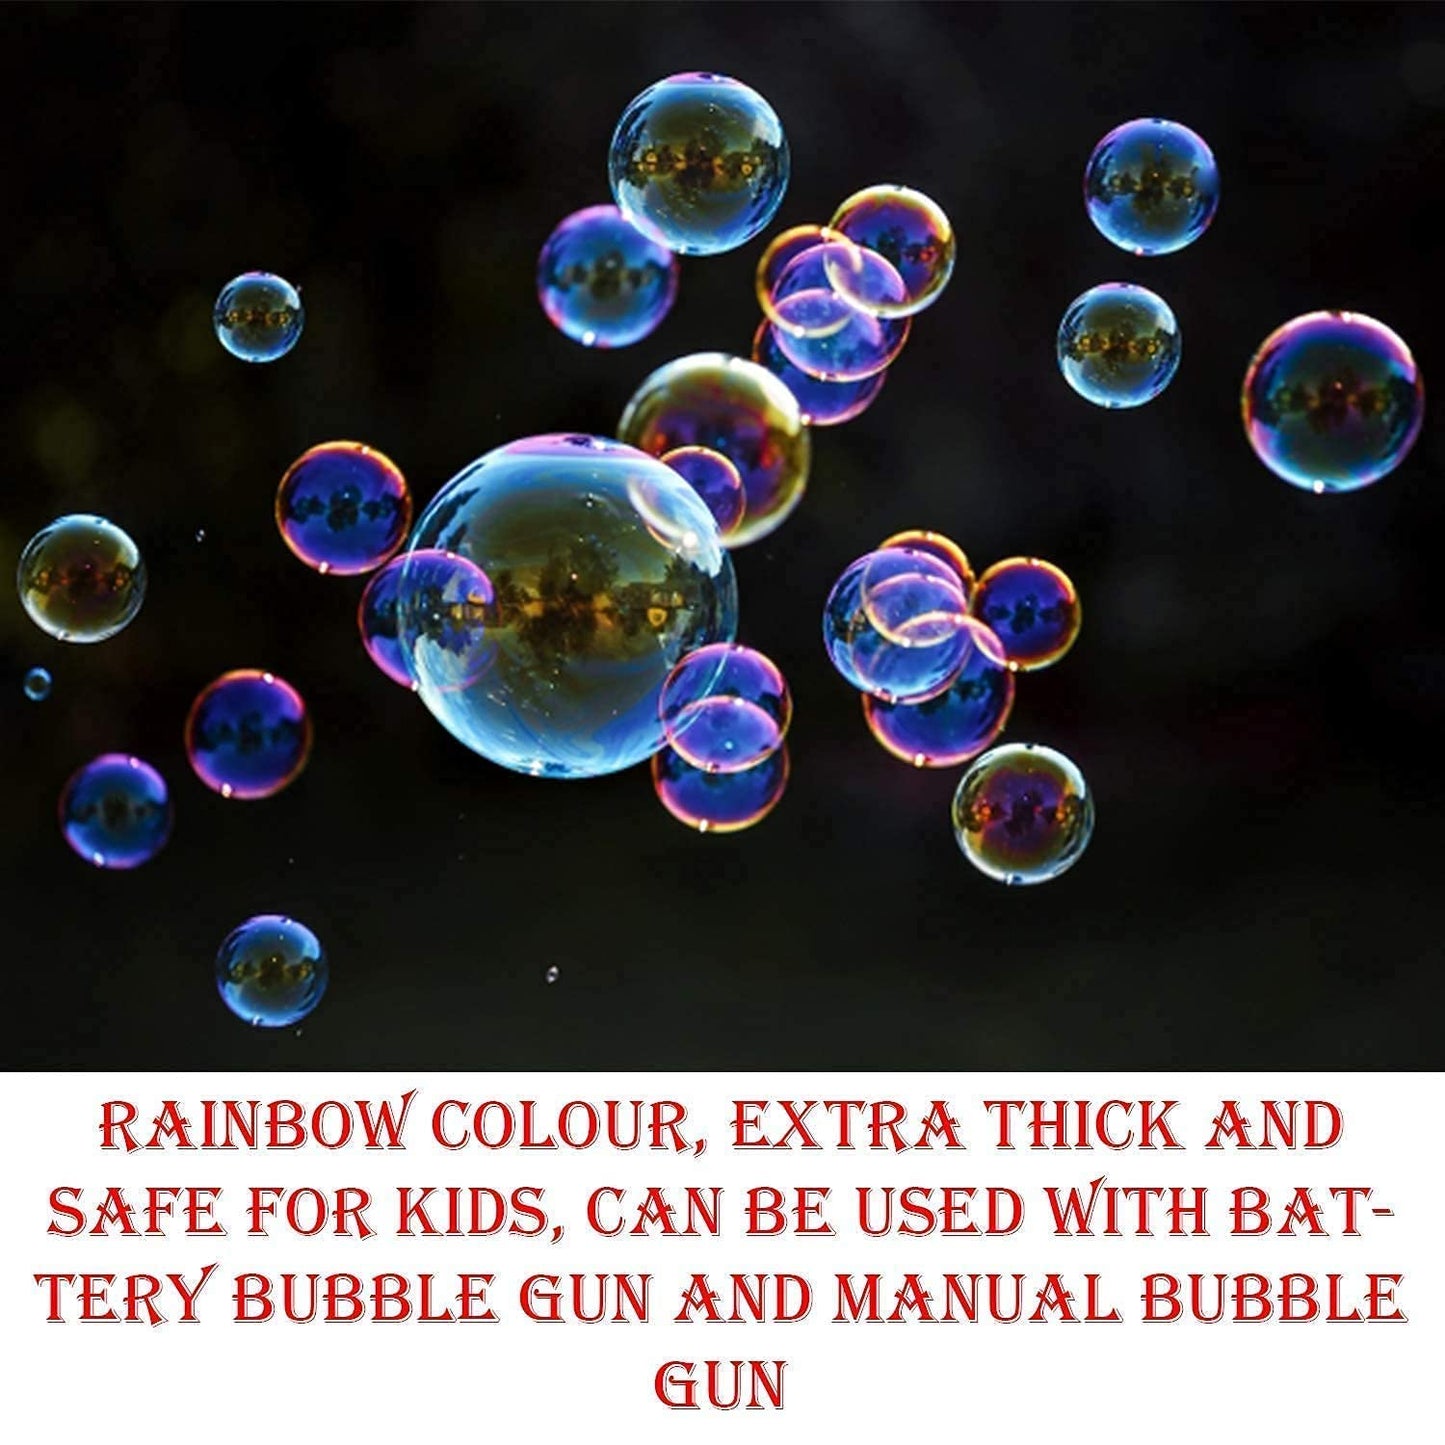 MM TOYS Bubble Gun Refill Liquid Solution Soap Extra Thik For Big Colorfull bubbles -Non Toxic ,BIS Certified, Ready To Use for All type of toys